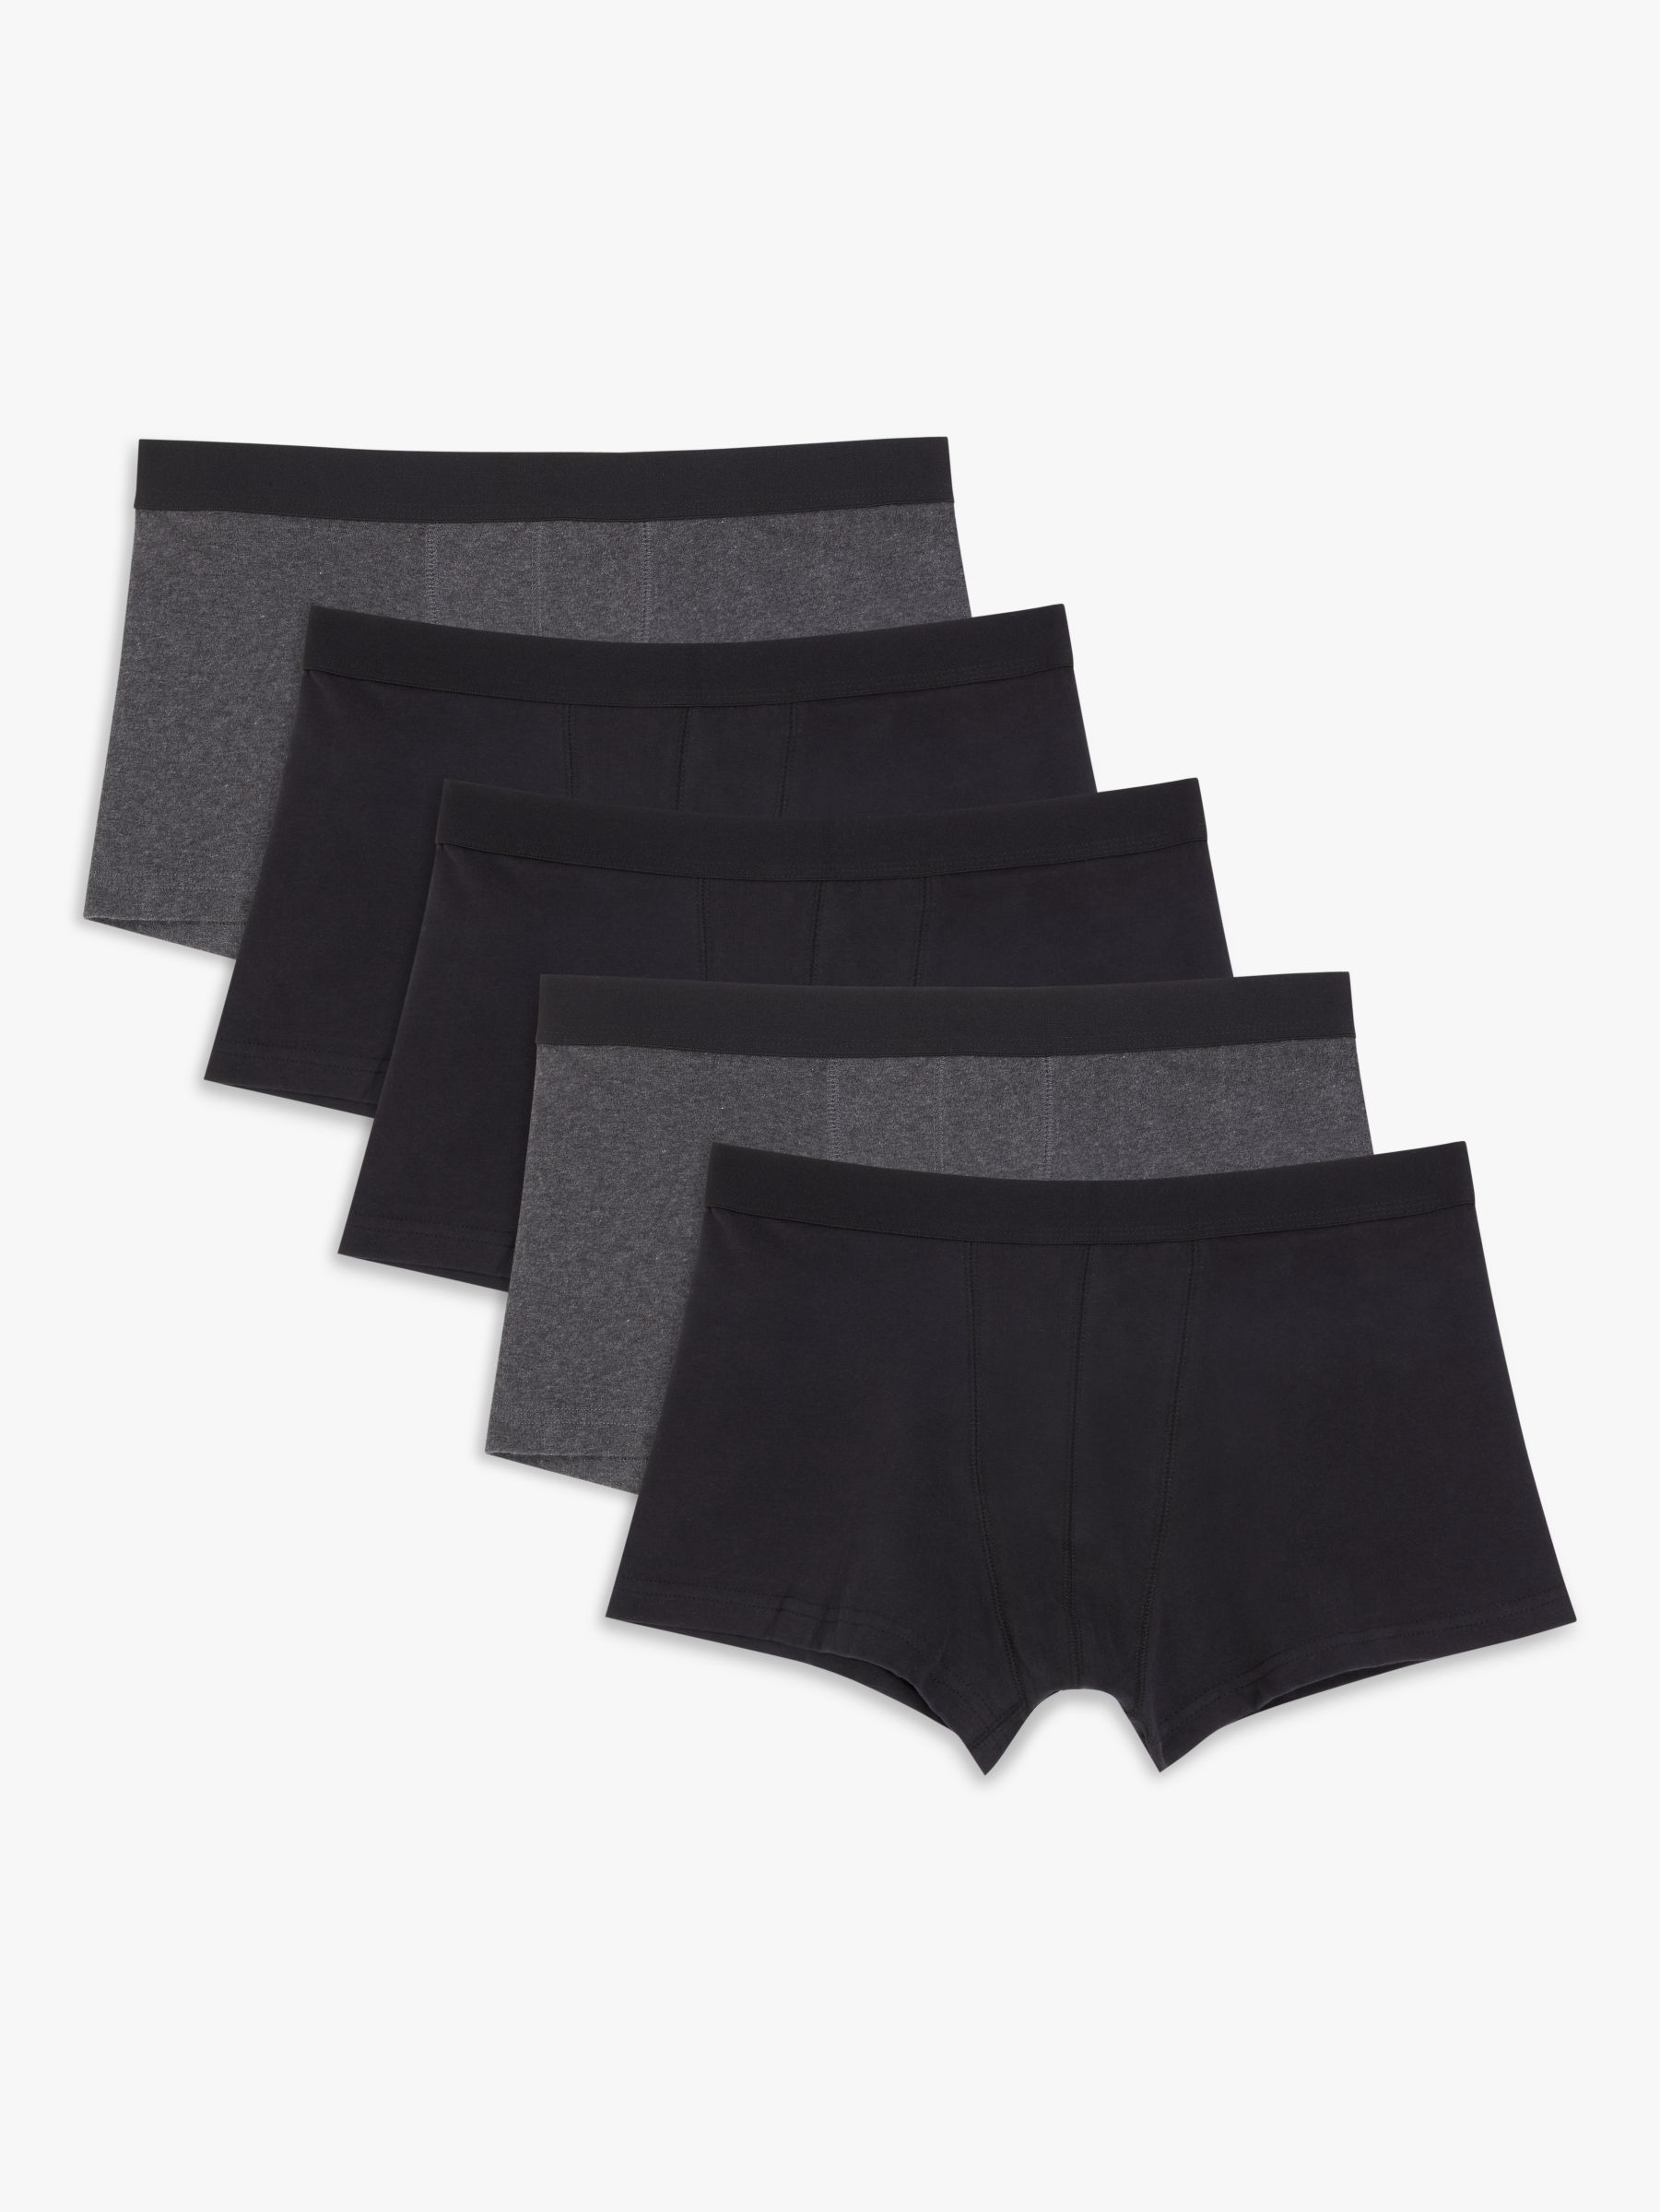 John Lewis ANYDAY Cotton Stretch Trunks, Pack of 5, Black/Grey at John ...